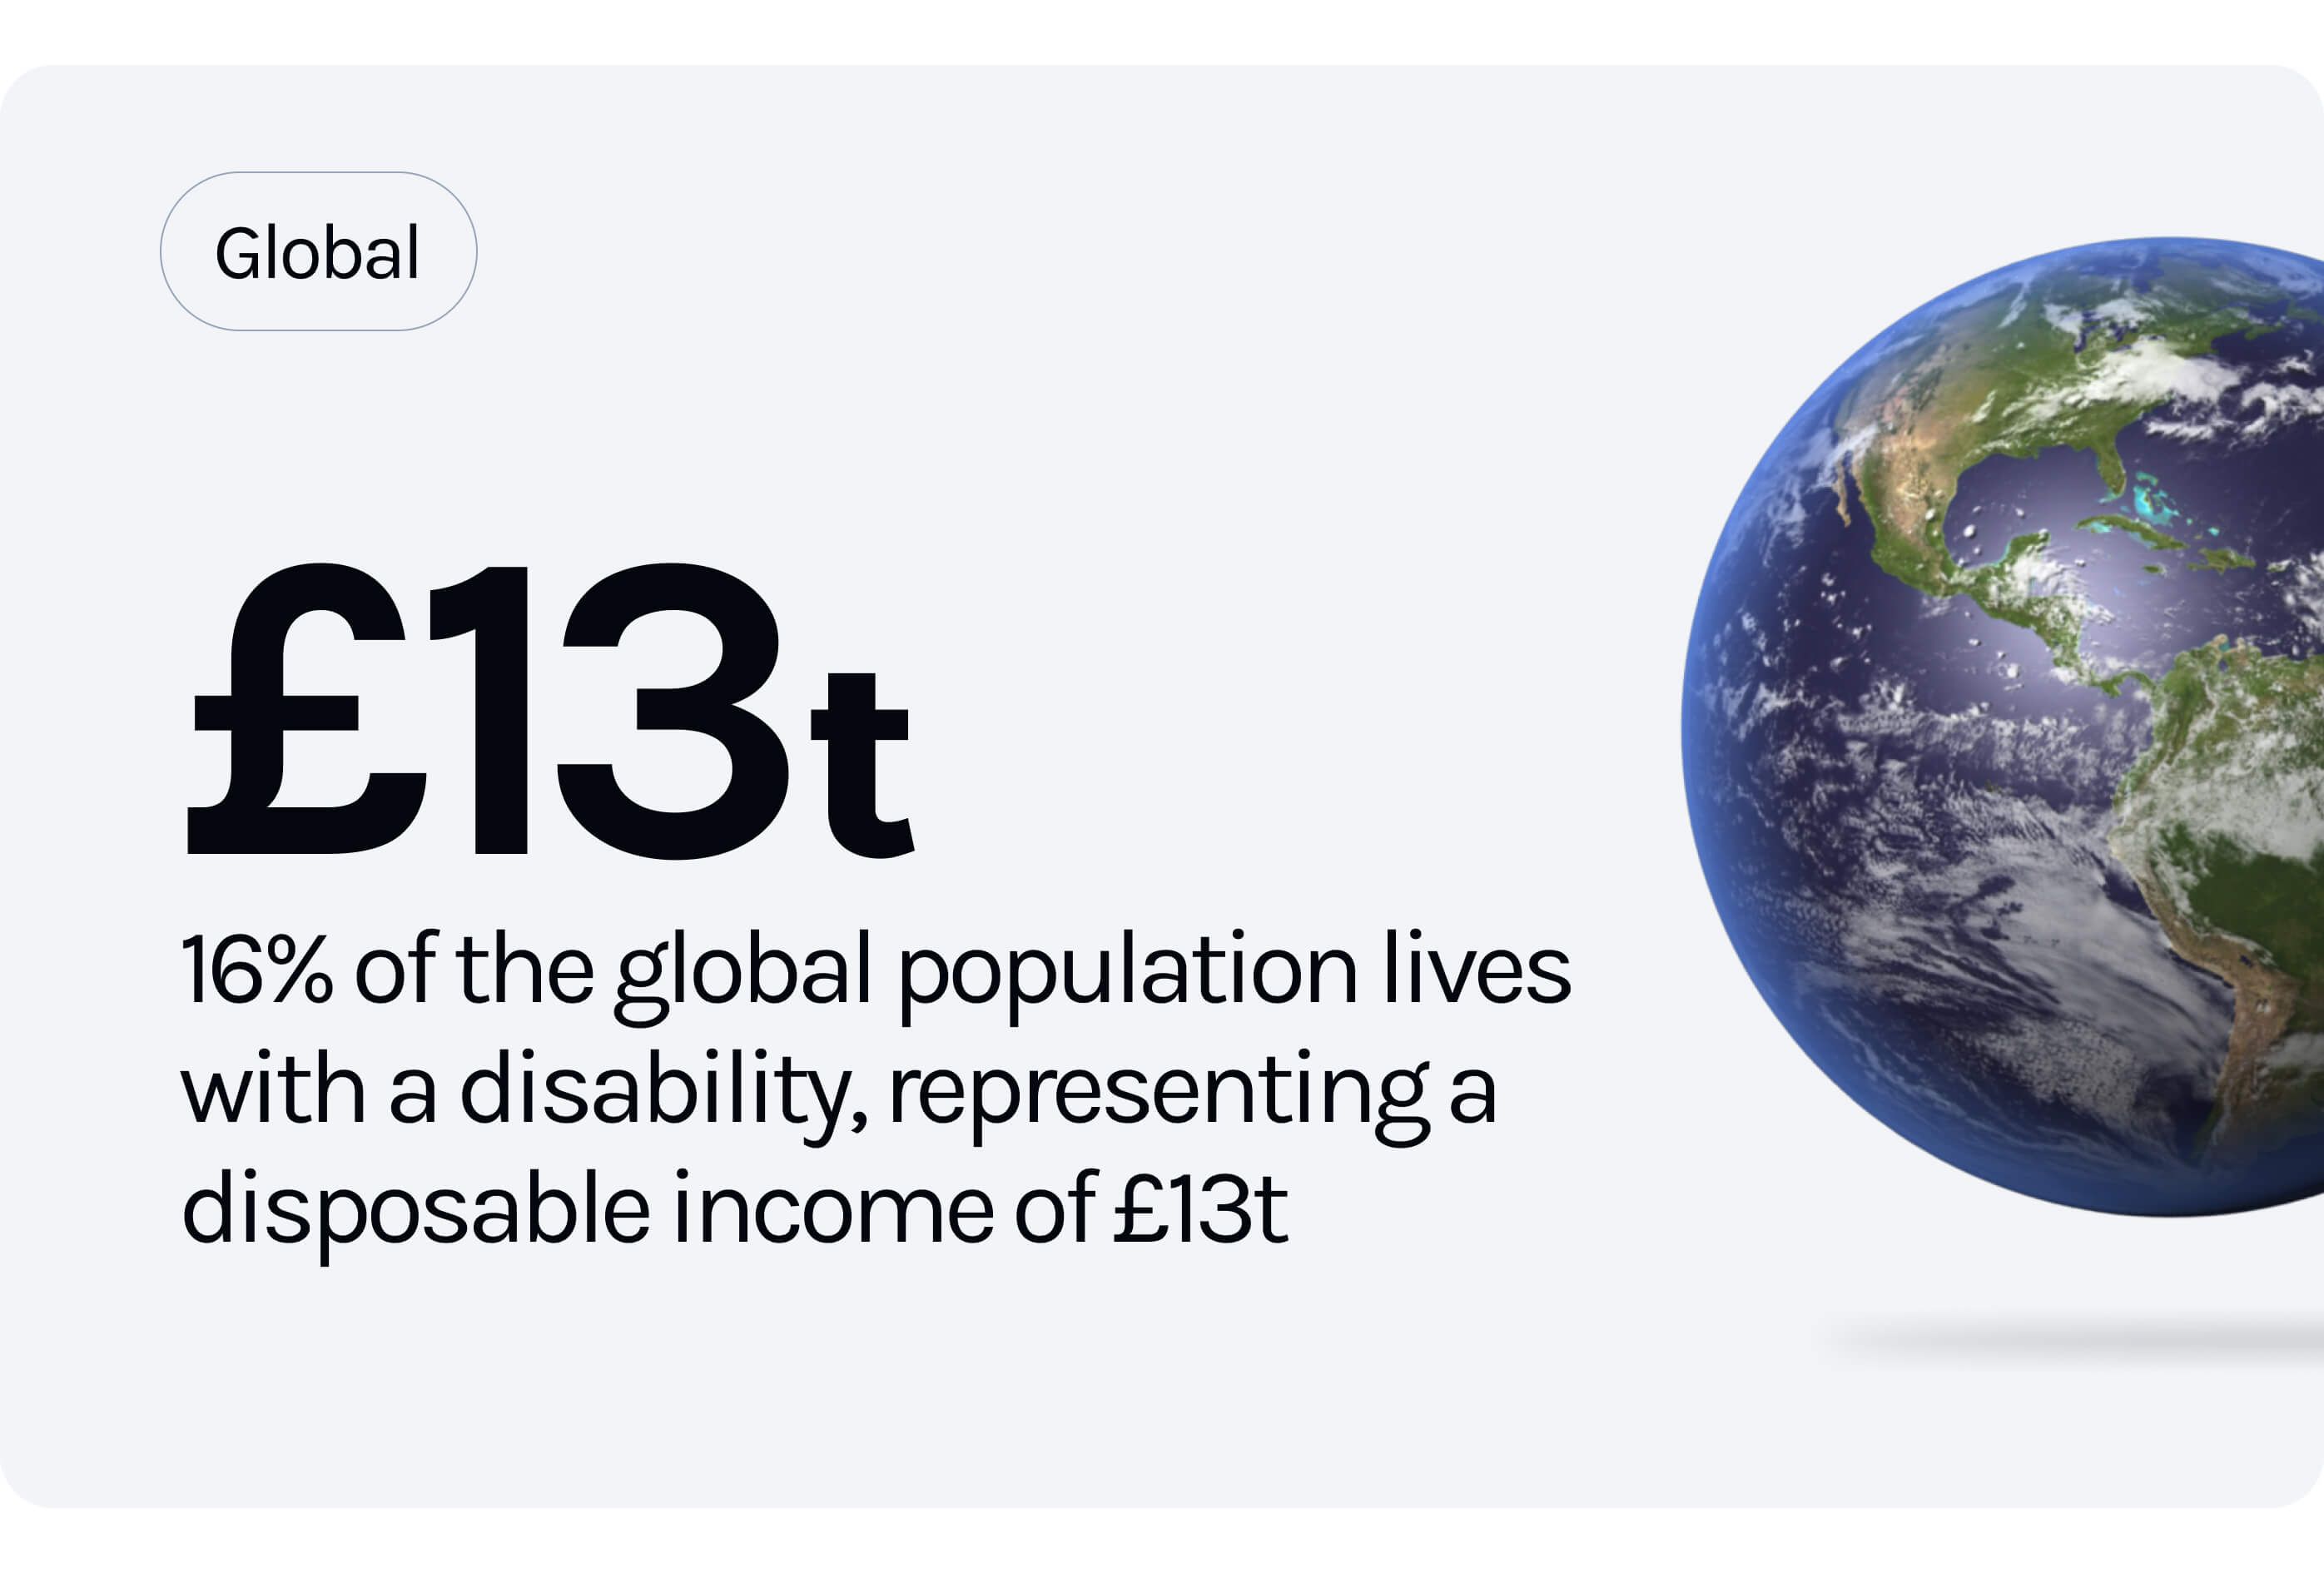 16% of the global population lives with a disability, representing a disposable income of £13t